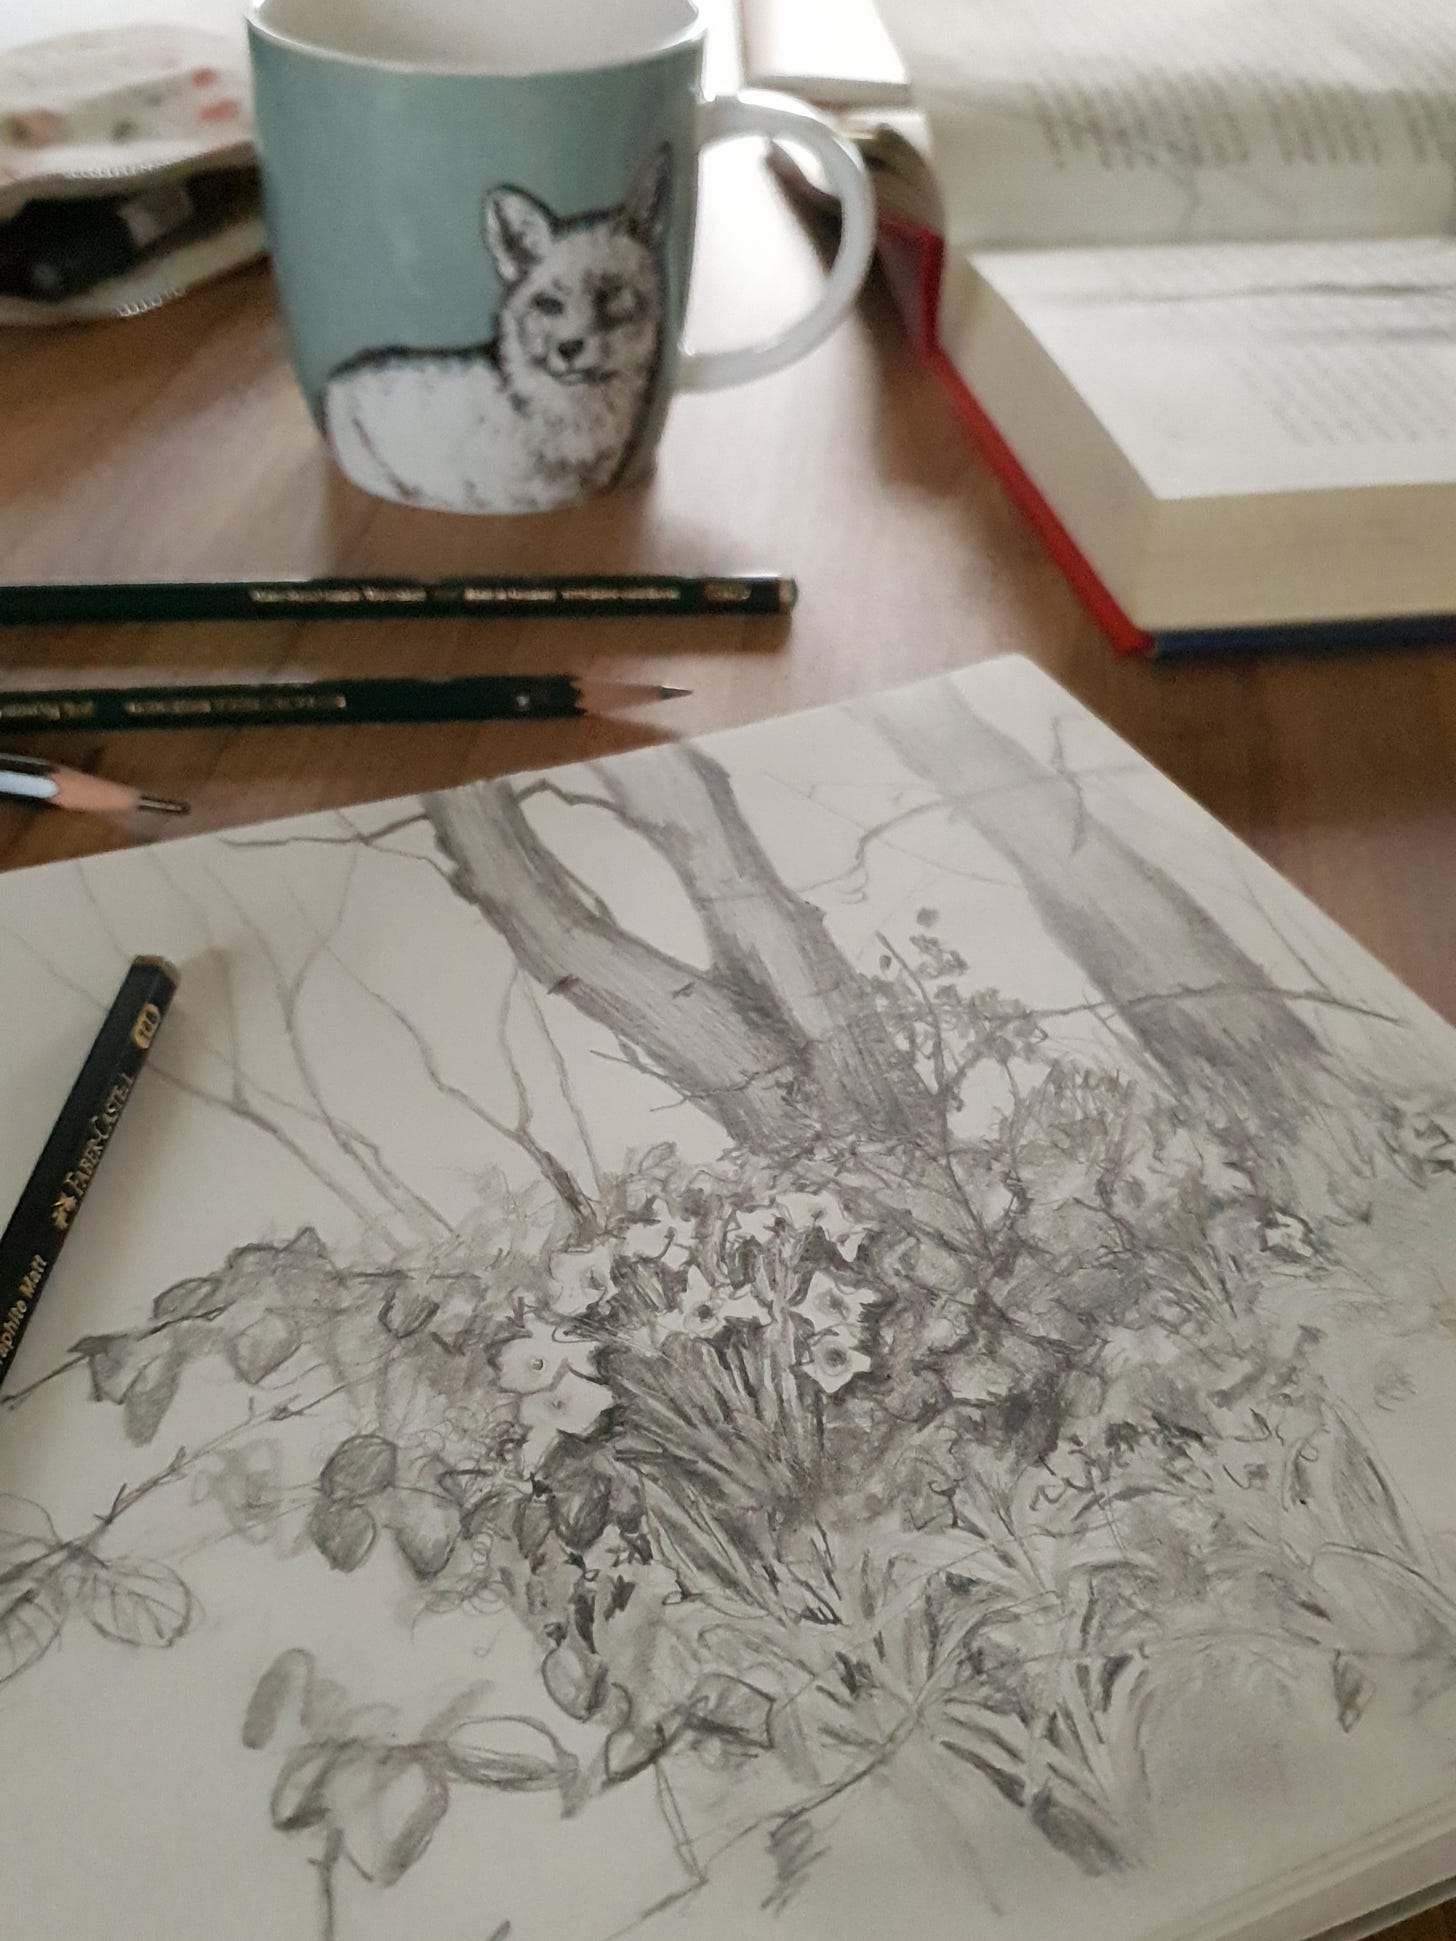 Pencils and paper on a table with a drawing of a woodland scene with daffodils. A mug with a fox and an open book in the background.